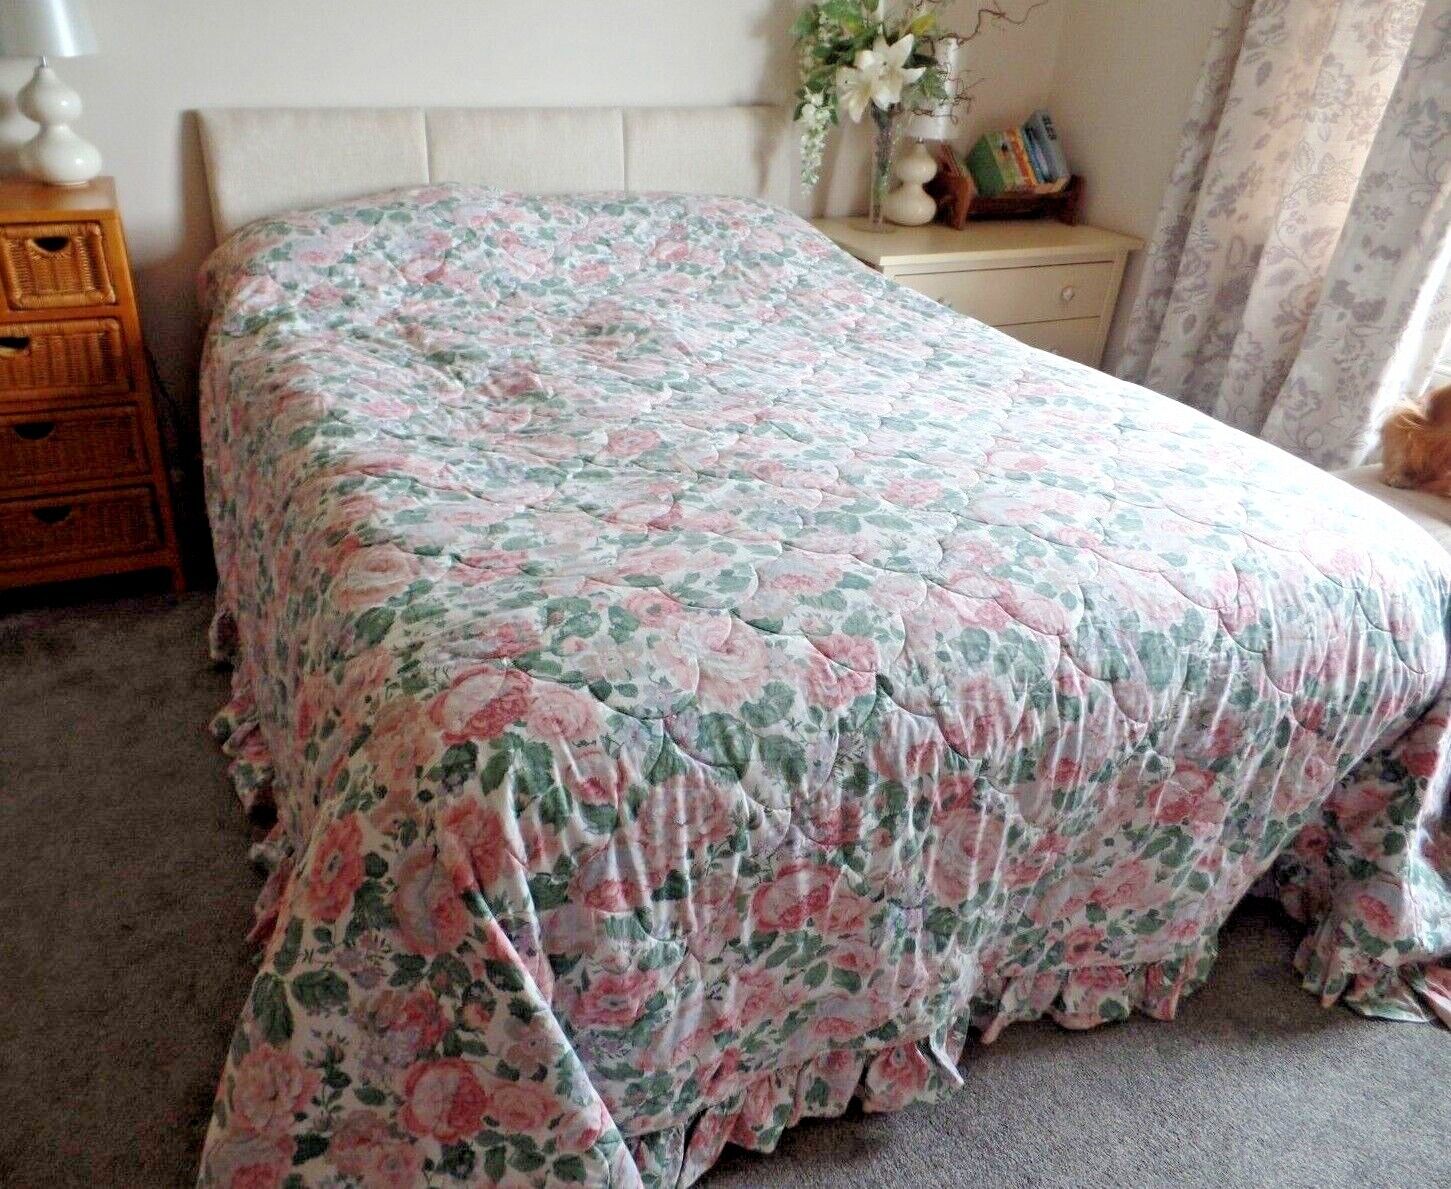 DORMA COUNTRY ROSES KING SIZED VINTAGE BEDSPREAD THROW COVER QUILT